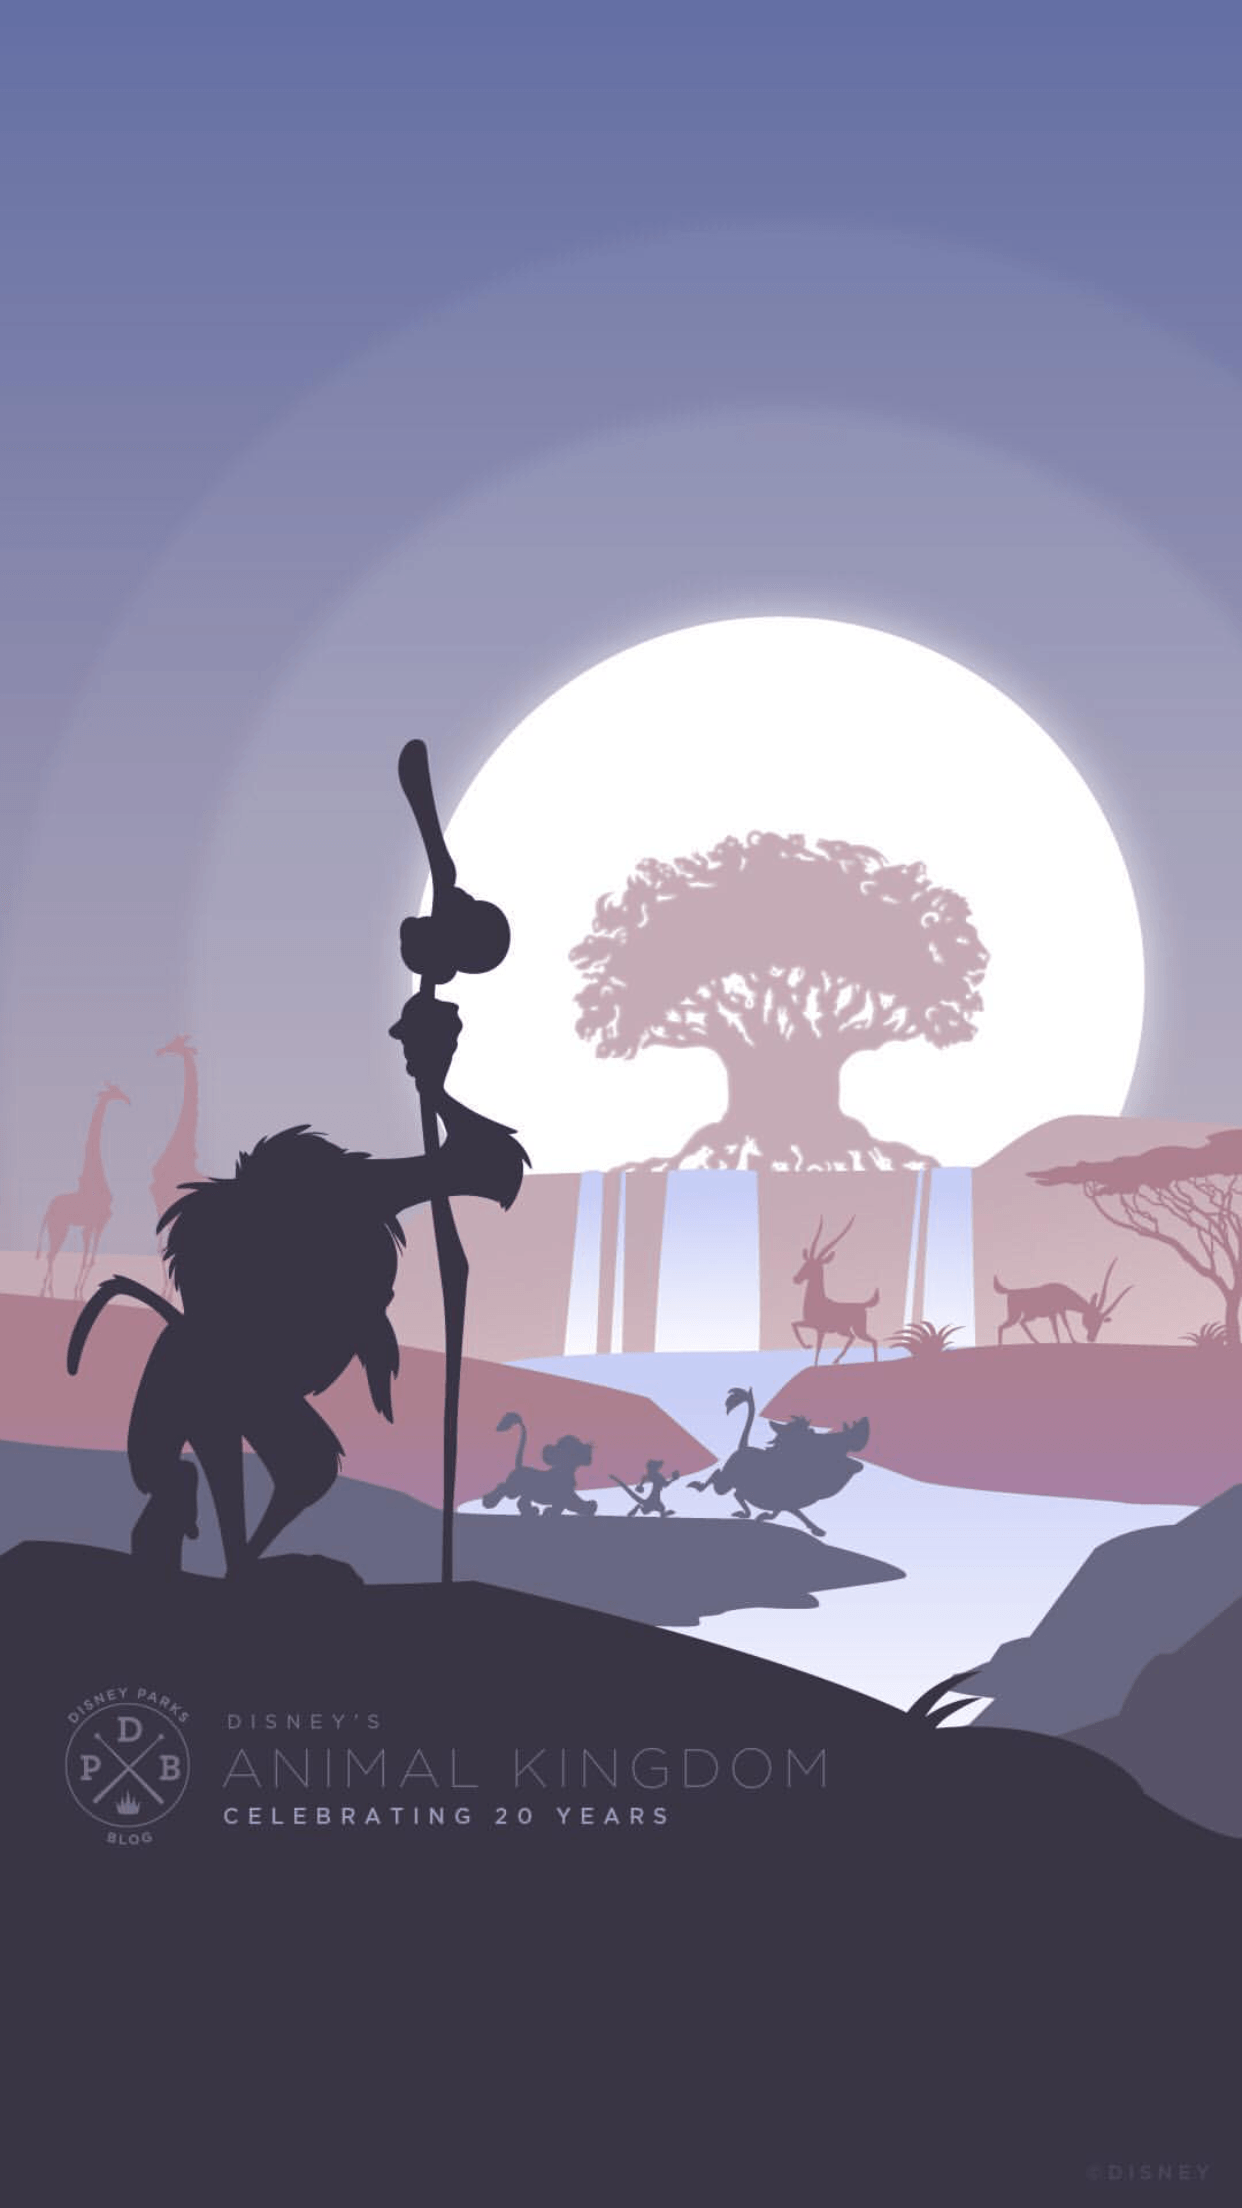 Rafiki Images | Icons, Wallpapers and Photos on Fanpop